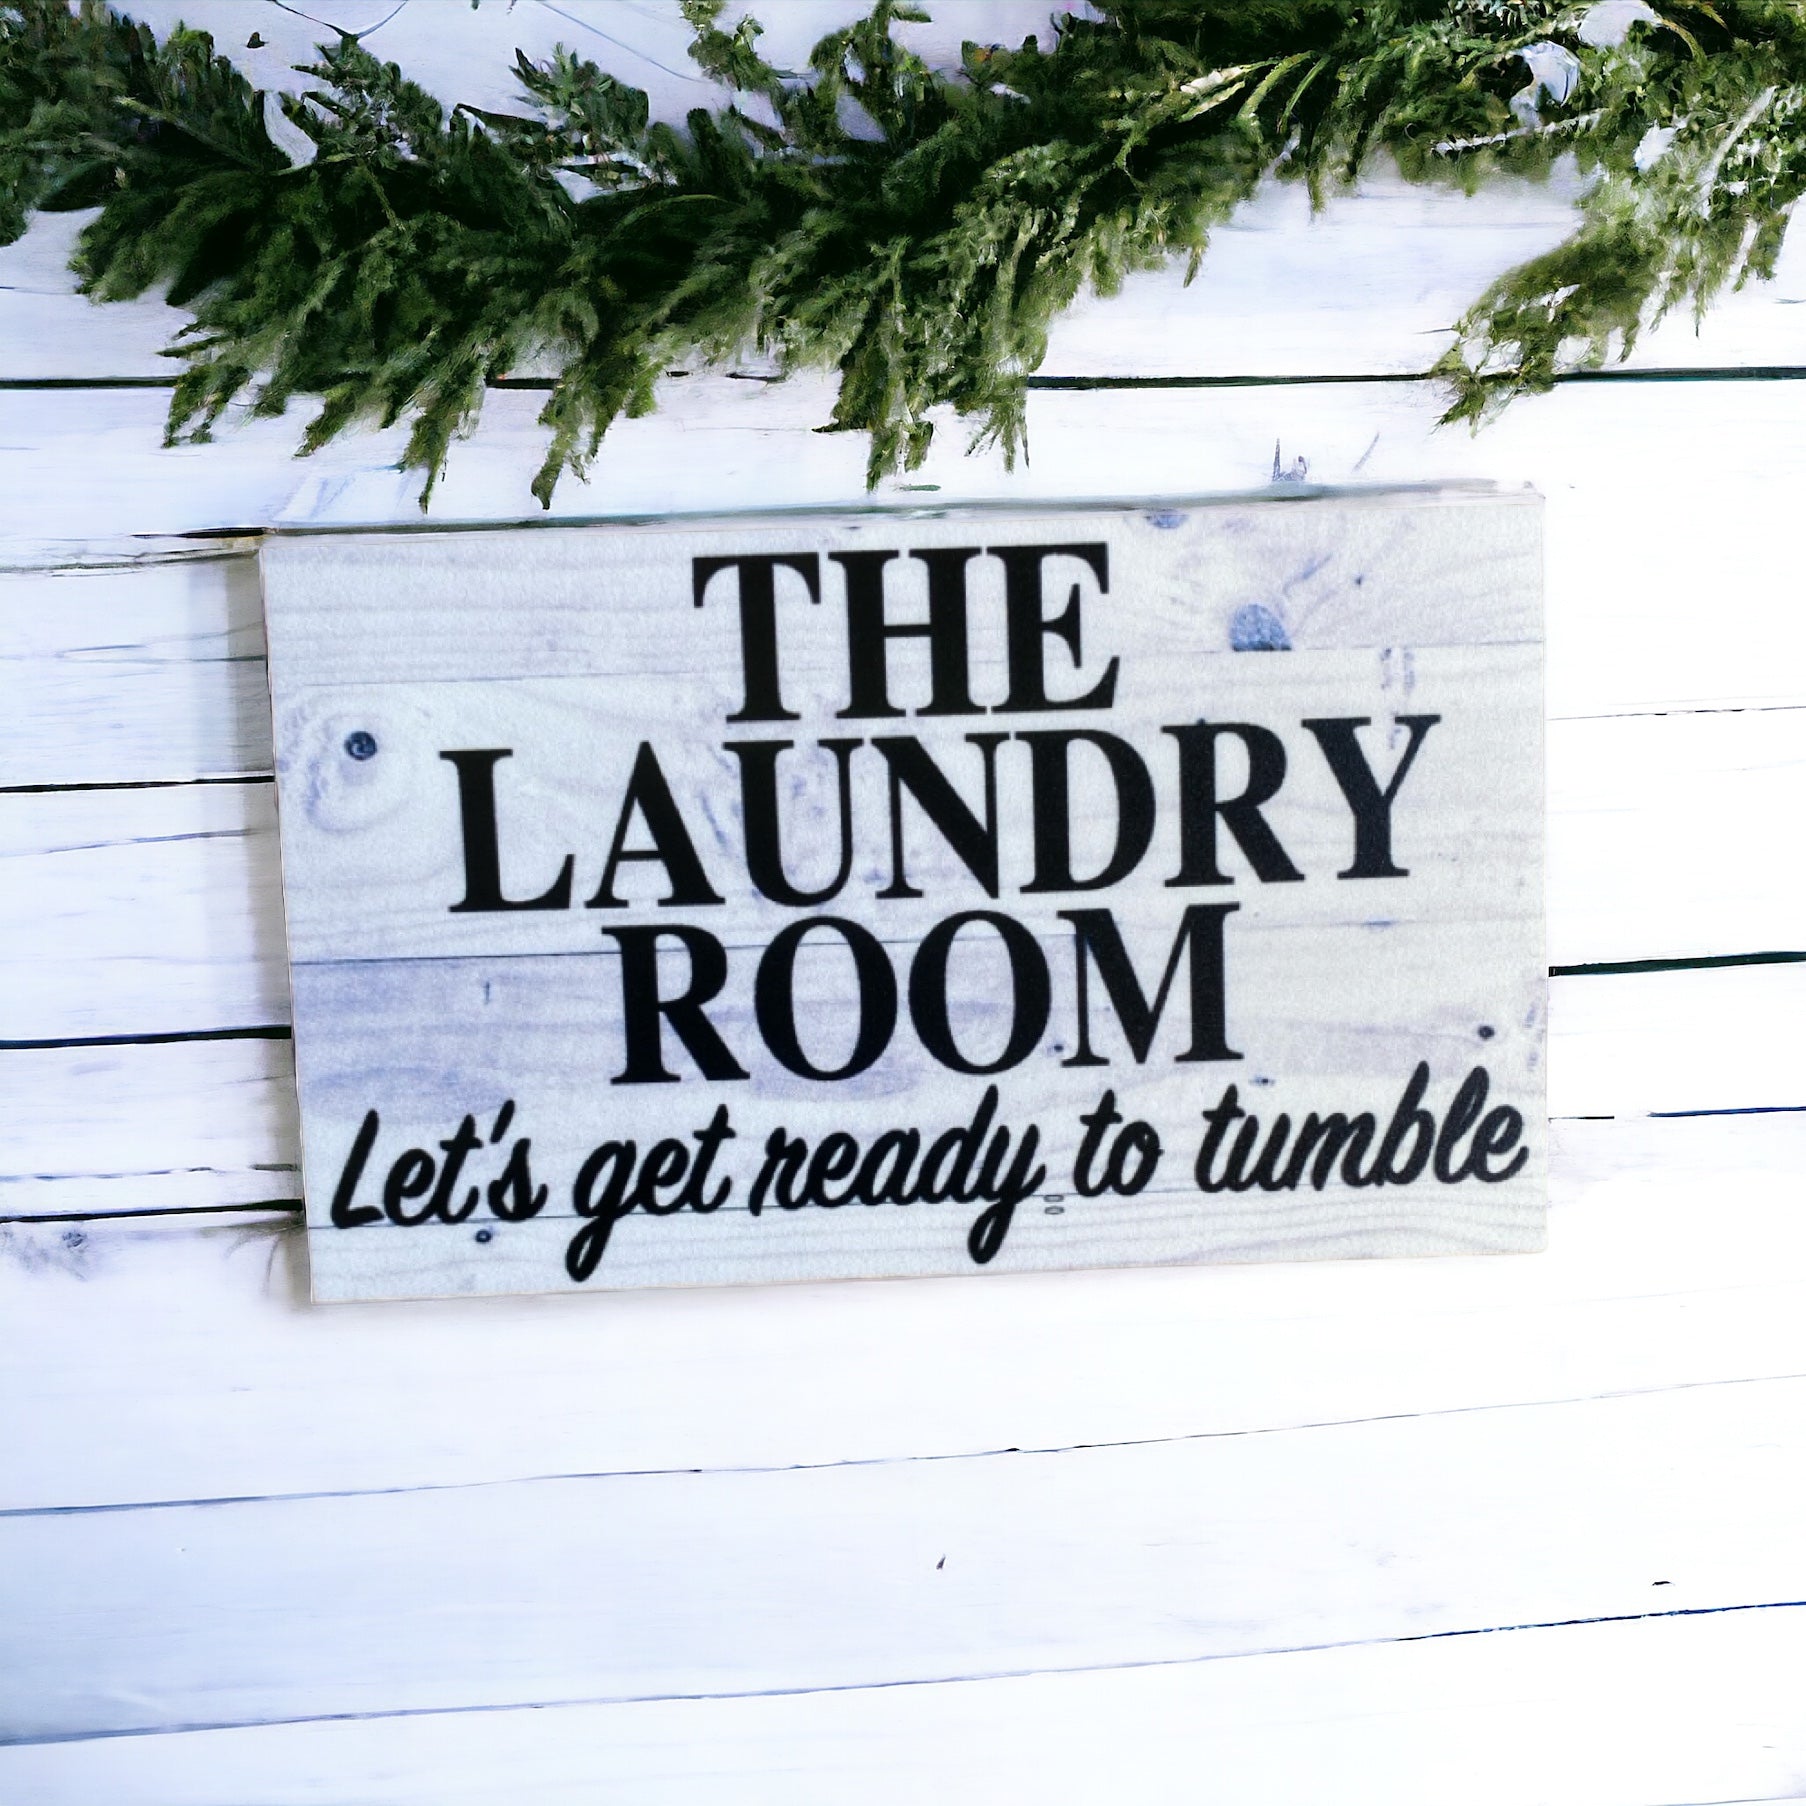 Laundry Room Ready To Tumble Sign - The Renmy Store Homewares & Gifts 